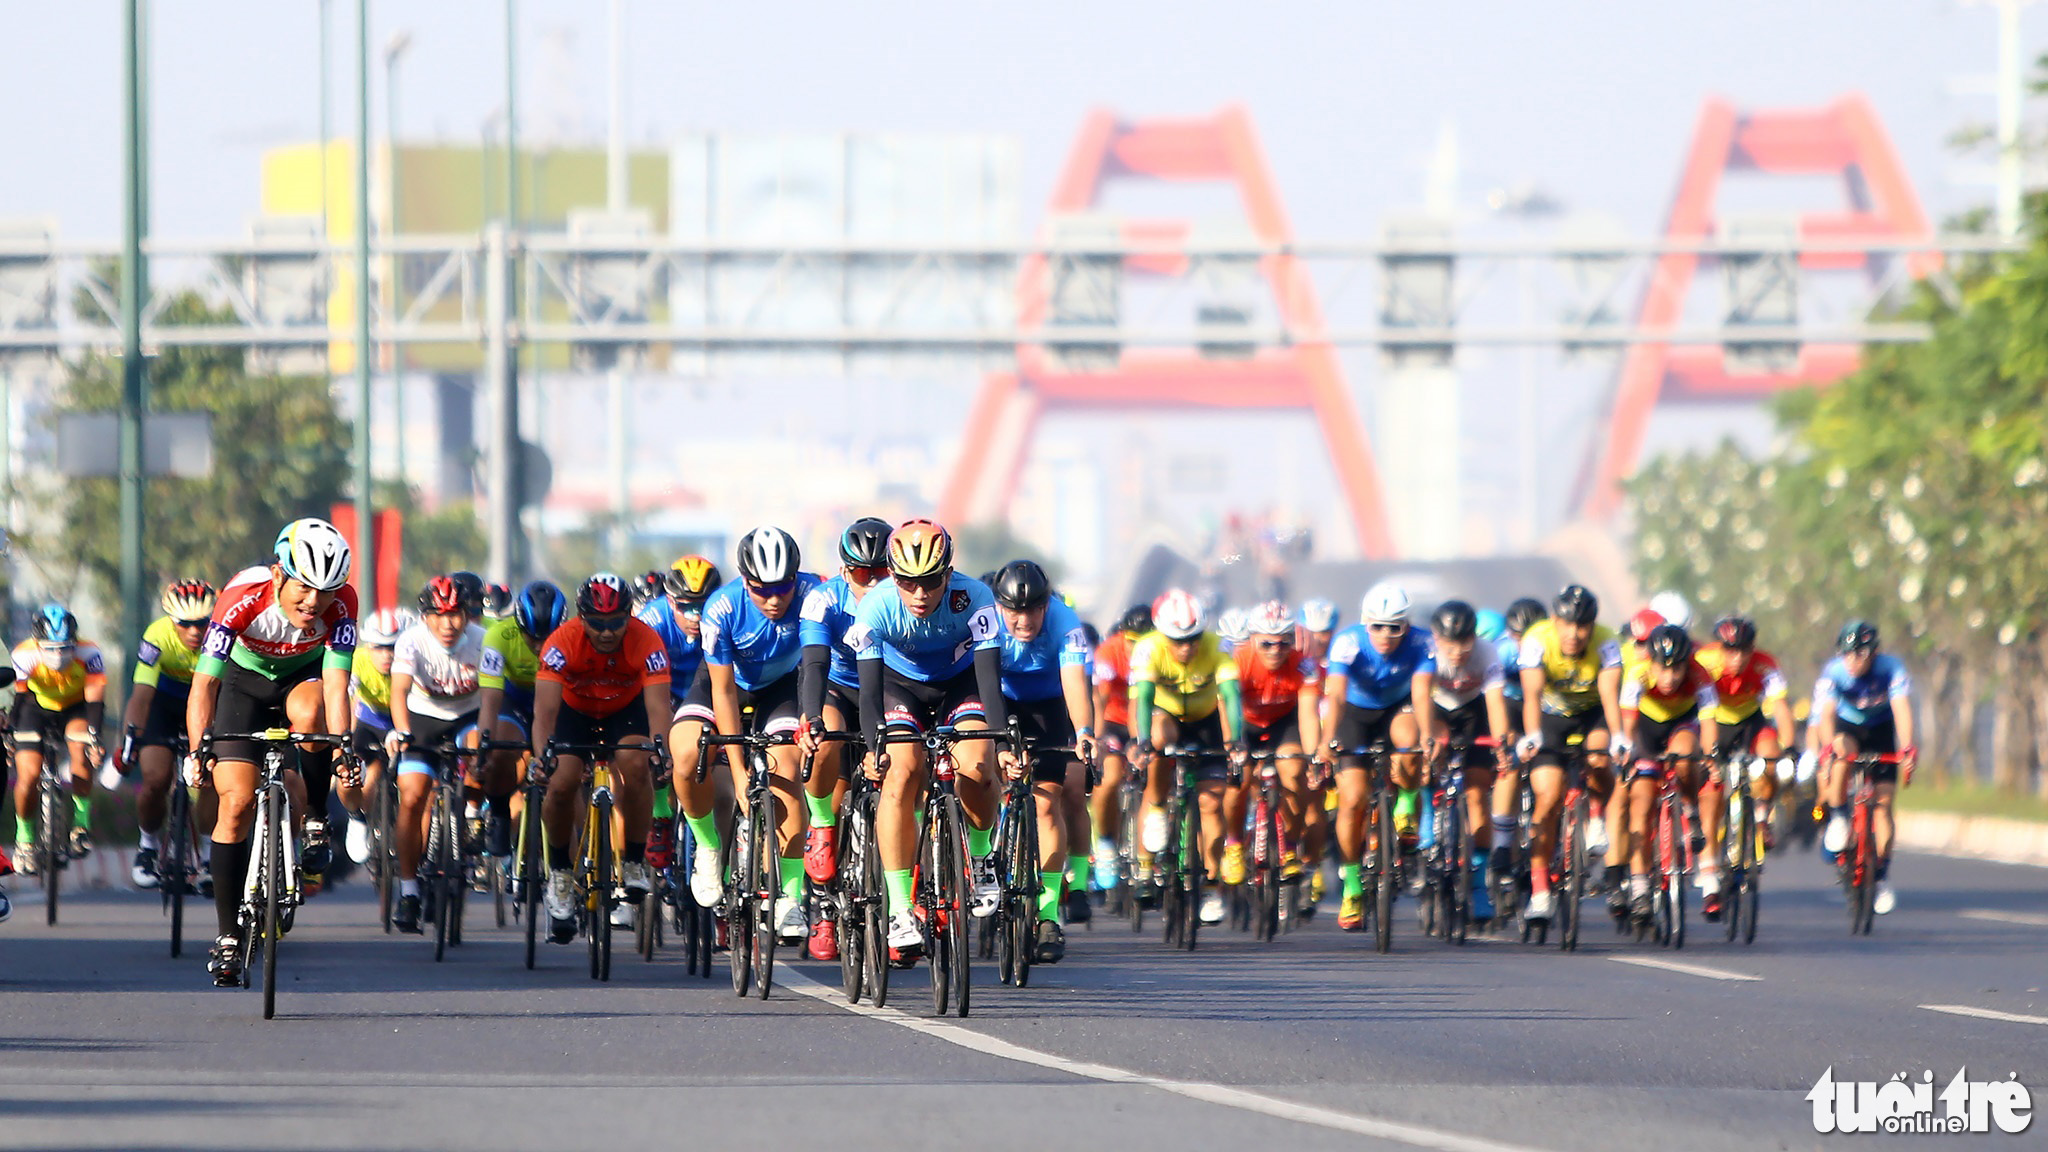 Nearly 200 participate in cycling race to mark one-year anniversary of Thu Duc City